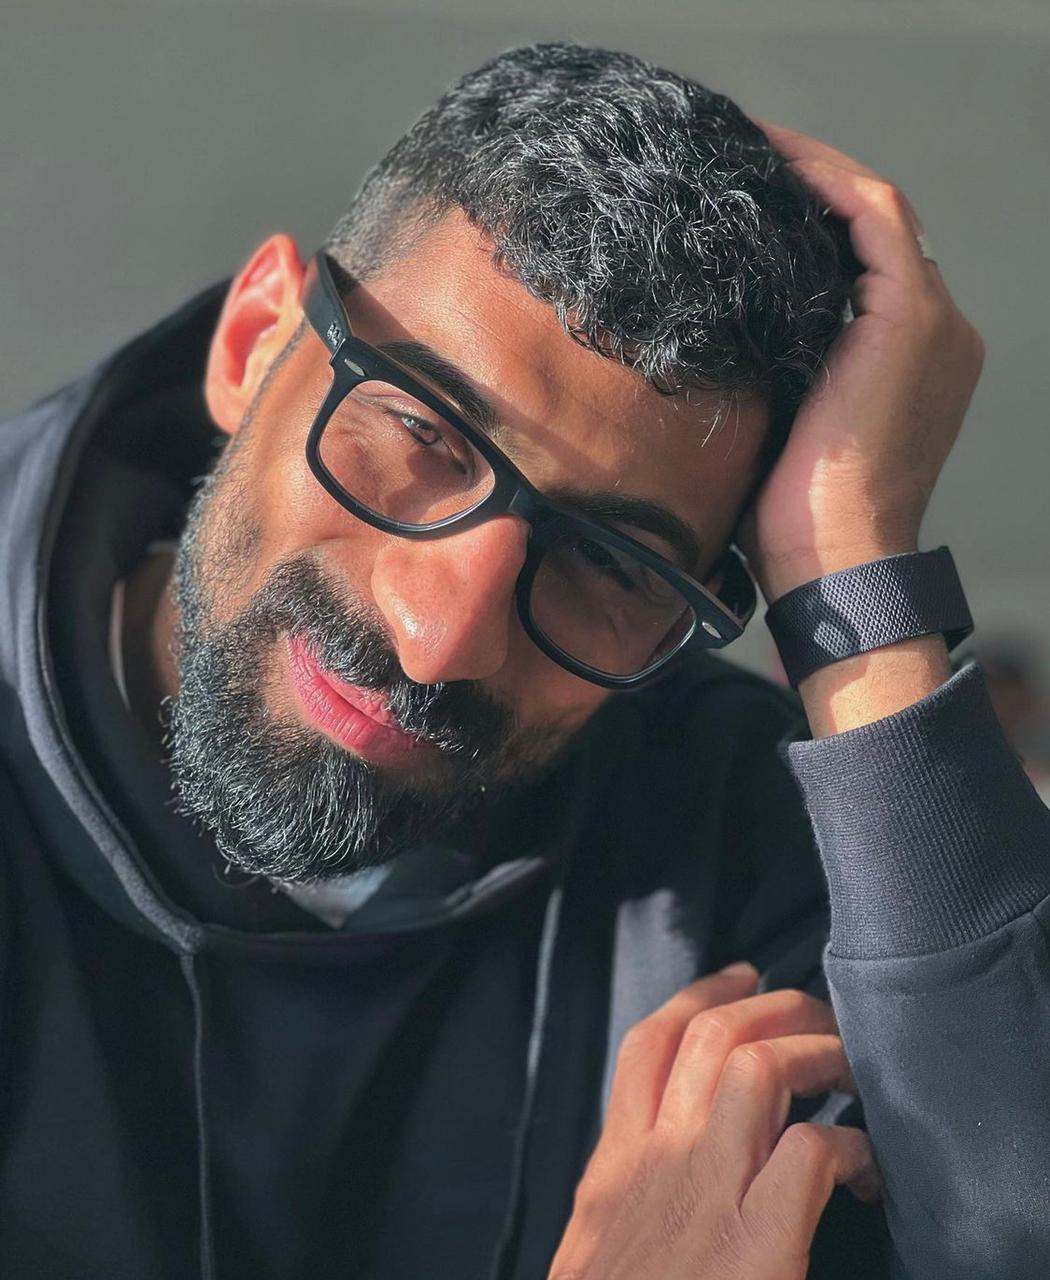 Hamoody Bamby, one of the most notable social media influencers in UAE